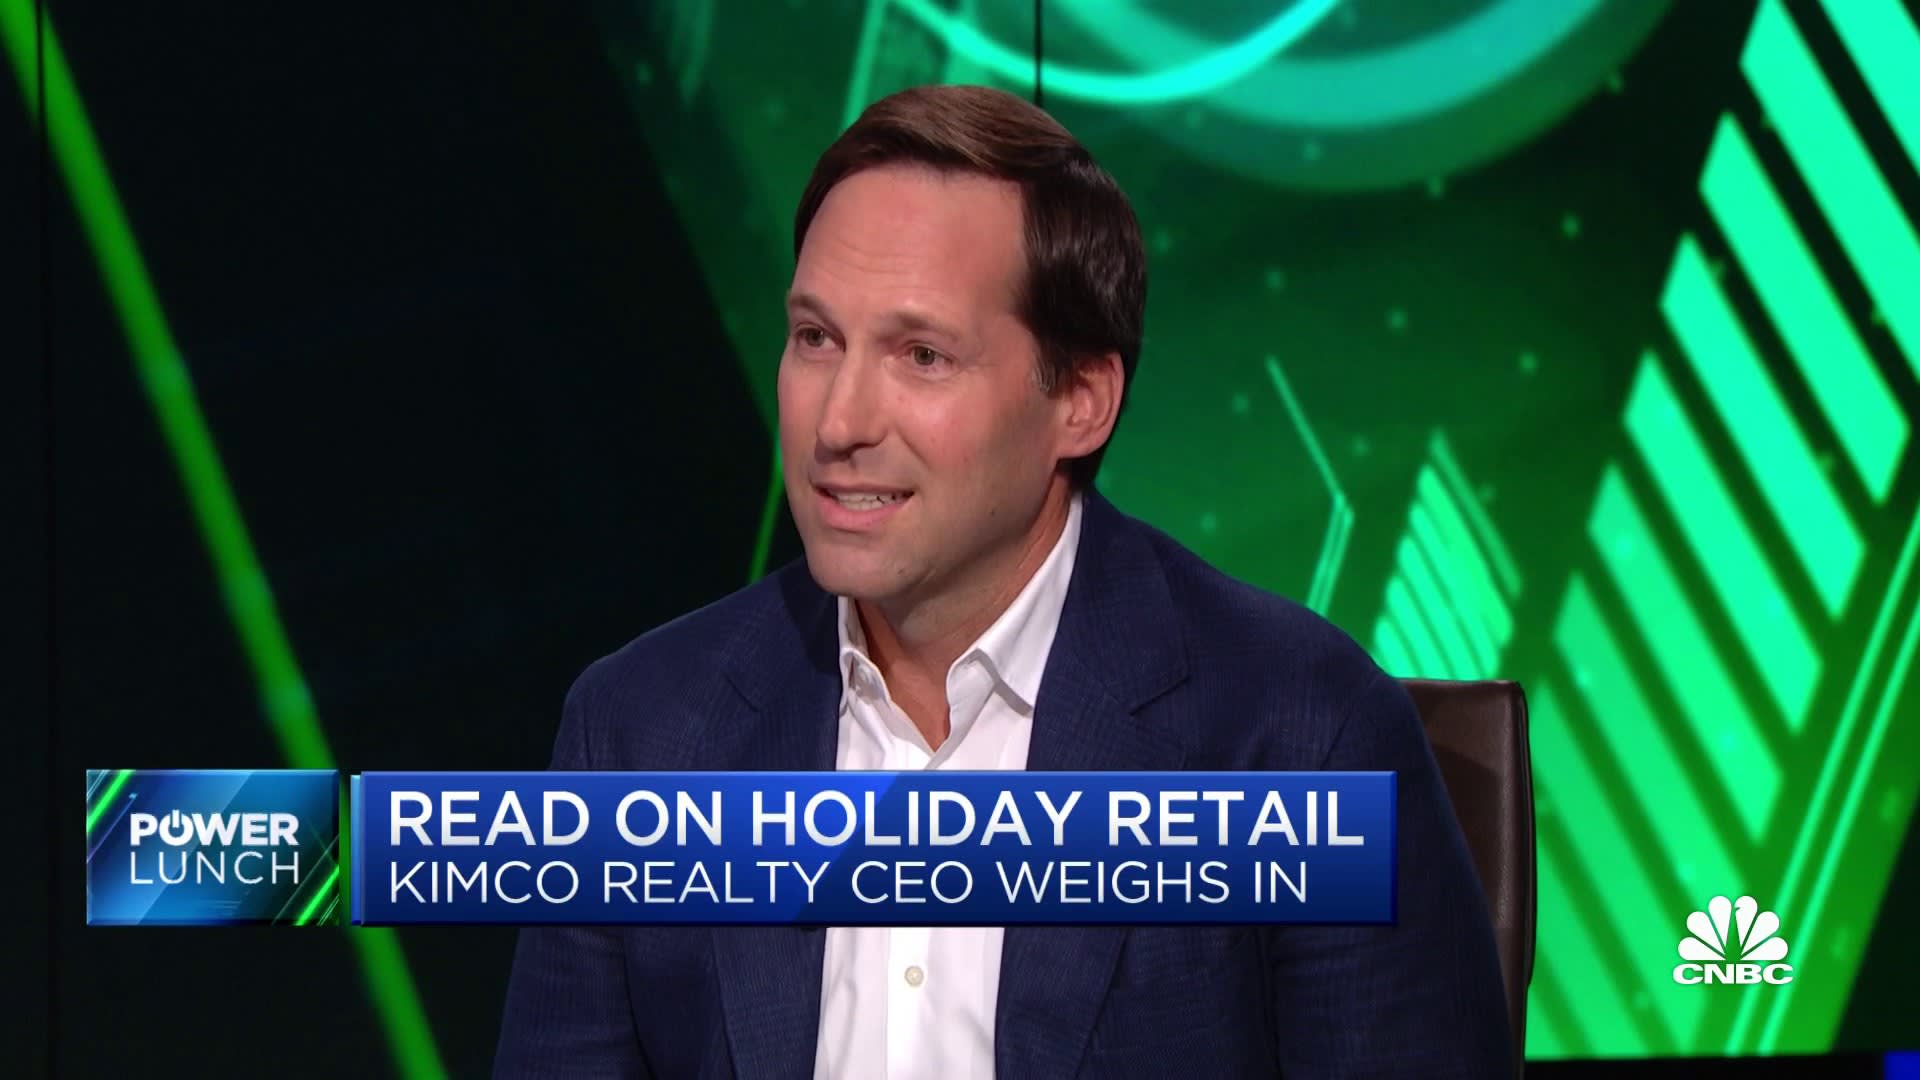 Kimco Realty CEO Conor Flynn: Shopping centers are steady defensive plays